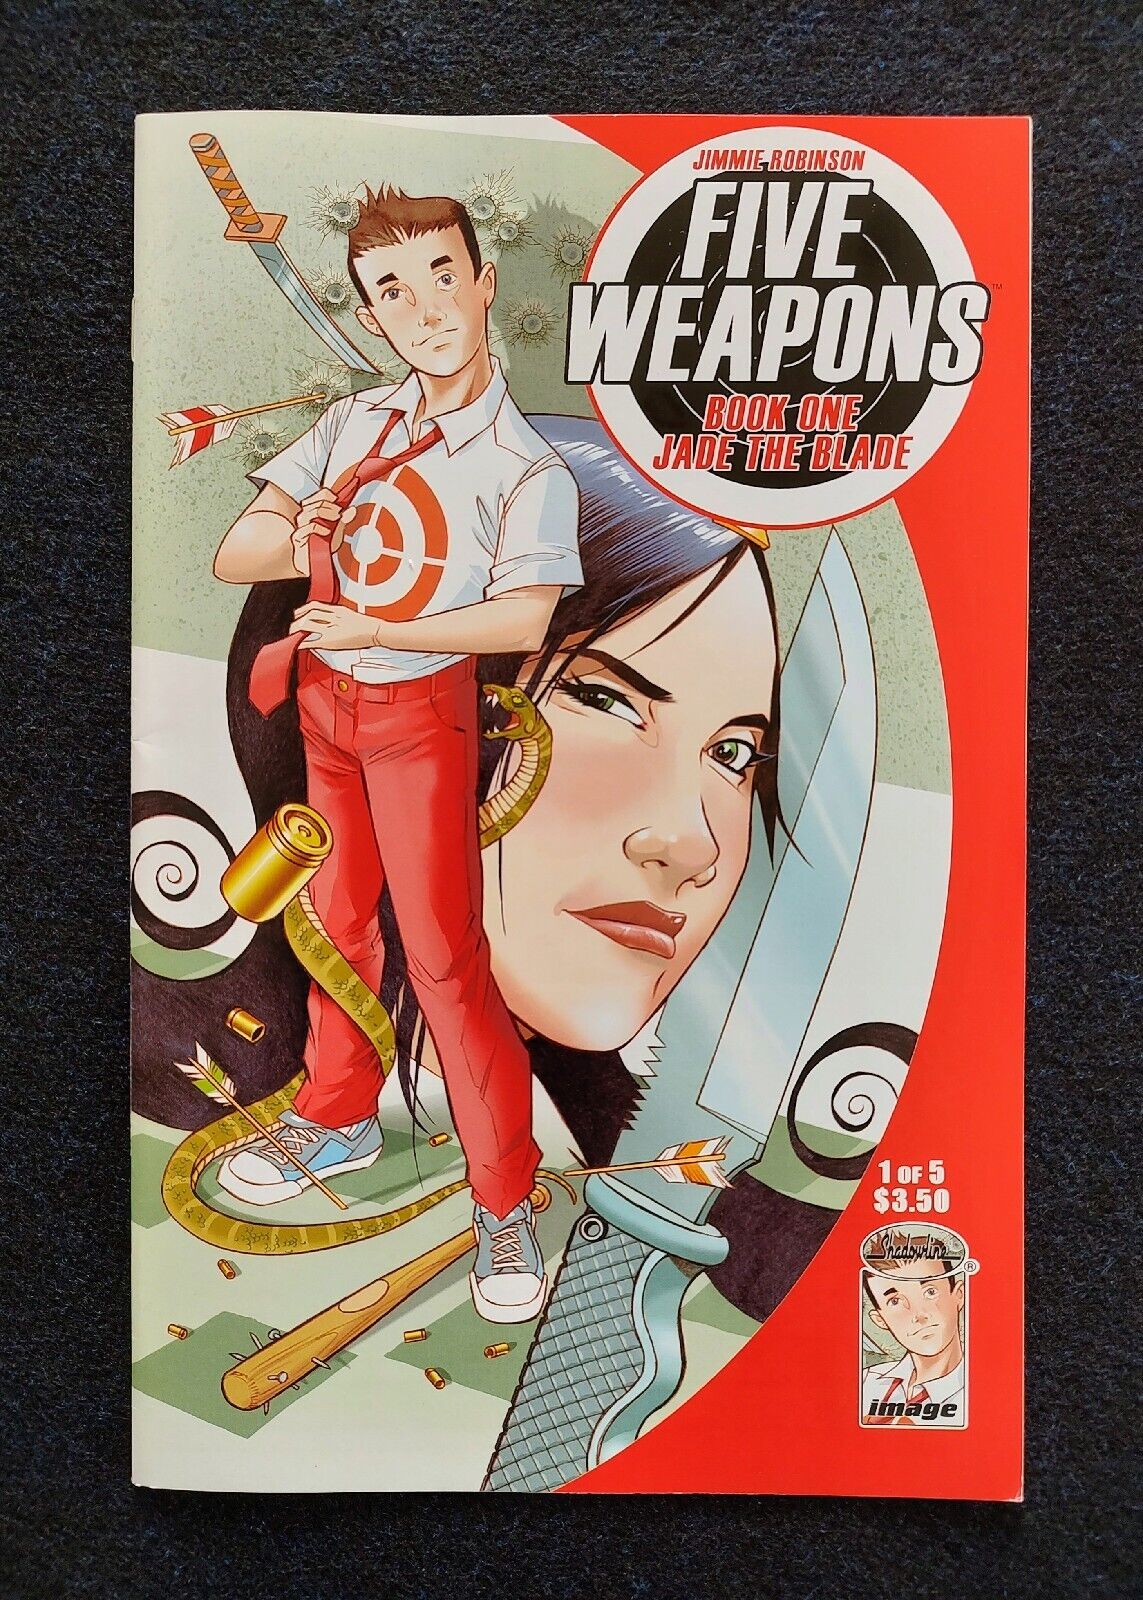 Five Weapons #1 Jade The Blade 2013 Image Comic Book Jimmie Robinson.